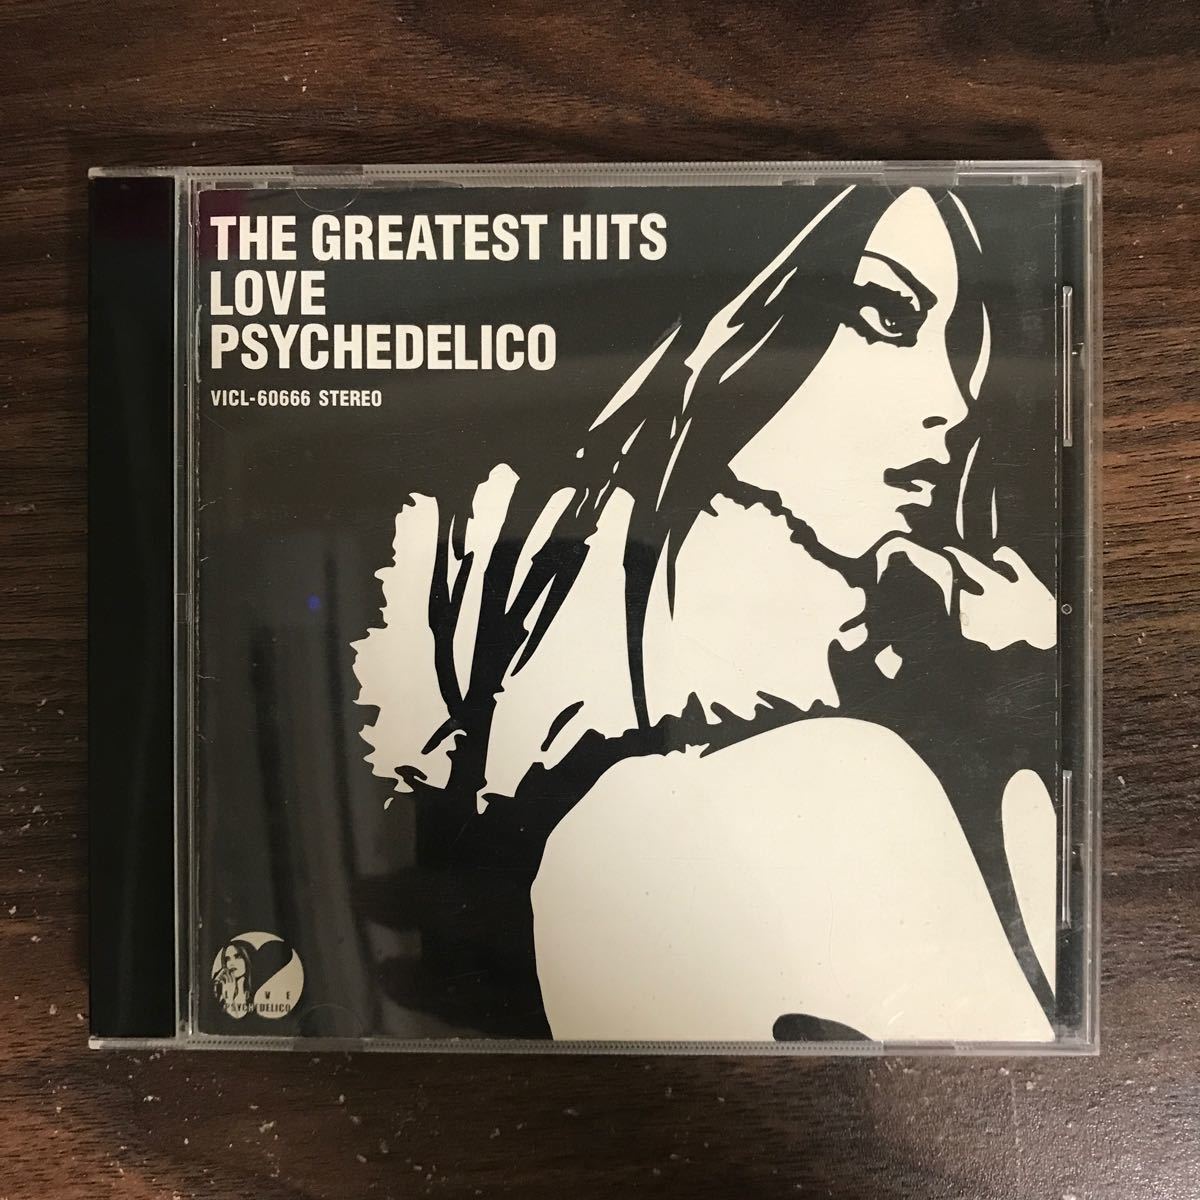 D502 帯付 中古CD100円 LOVE PSYCHEDELICO THE GREATEST HITSの画像1